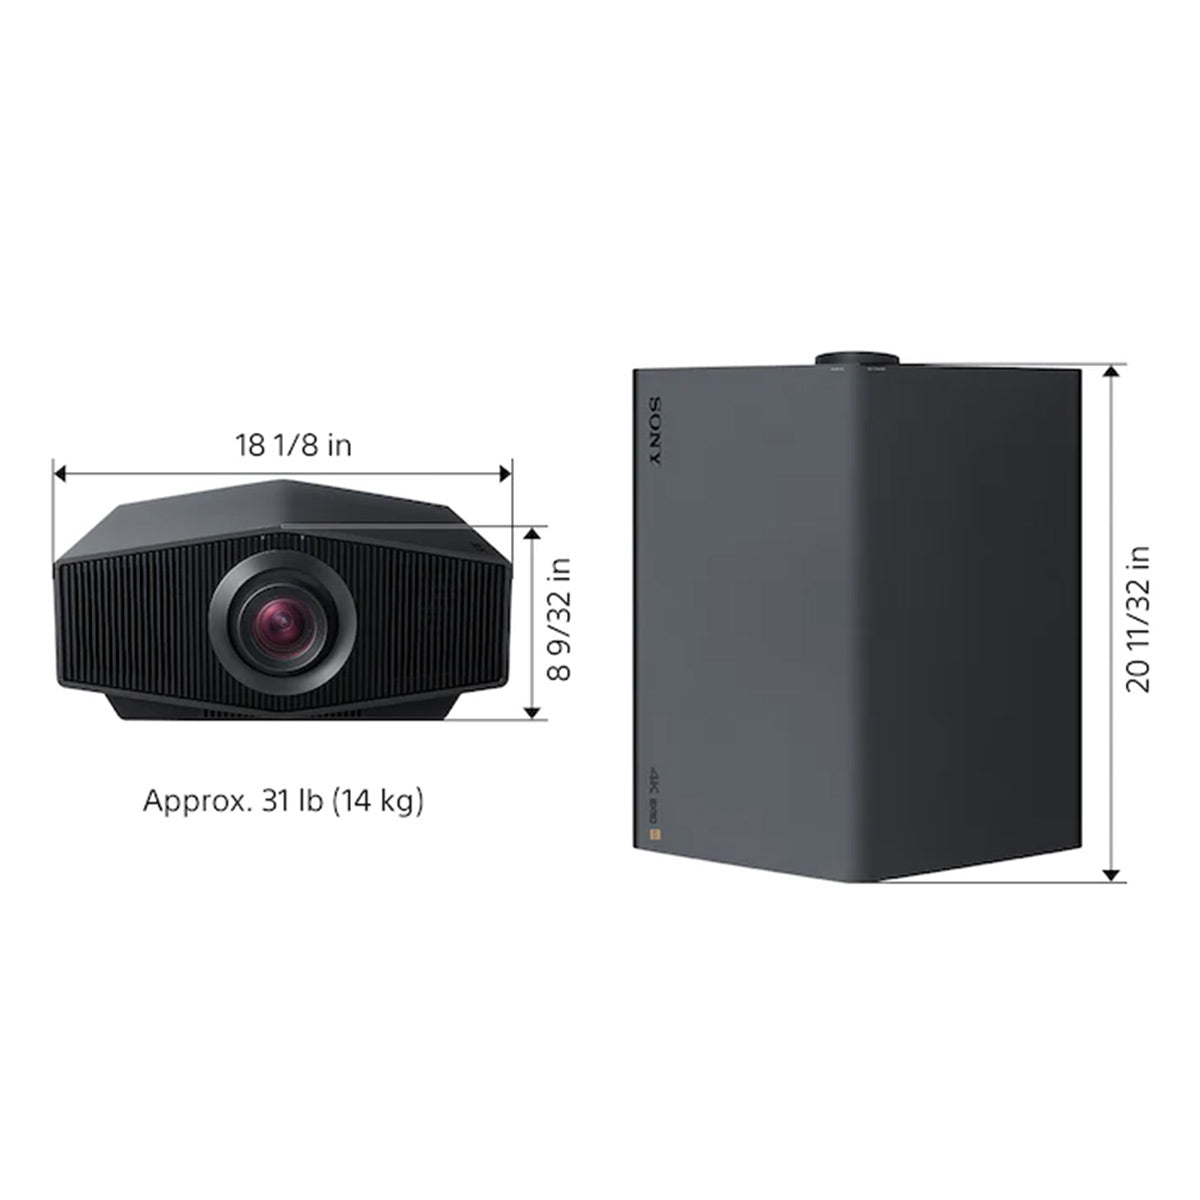 Sony VPL-XW5000ES 4K HDR Laser Home Theater Projector with Wide Dynamic Range Optics, 95% DCI-P3 Wide Color Gamut, & 2,000 Lumen Brightness (Black)